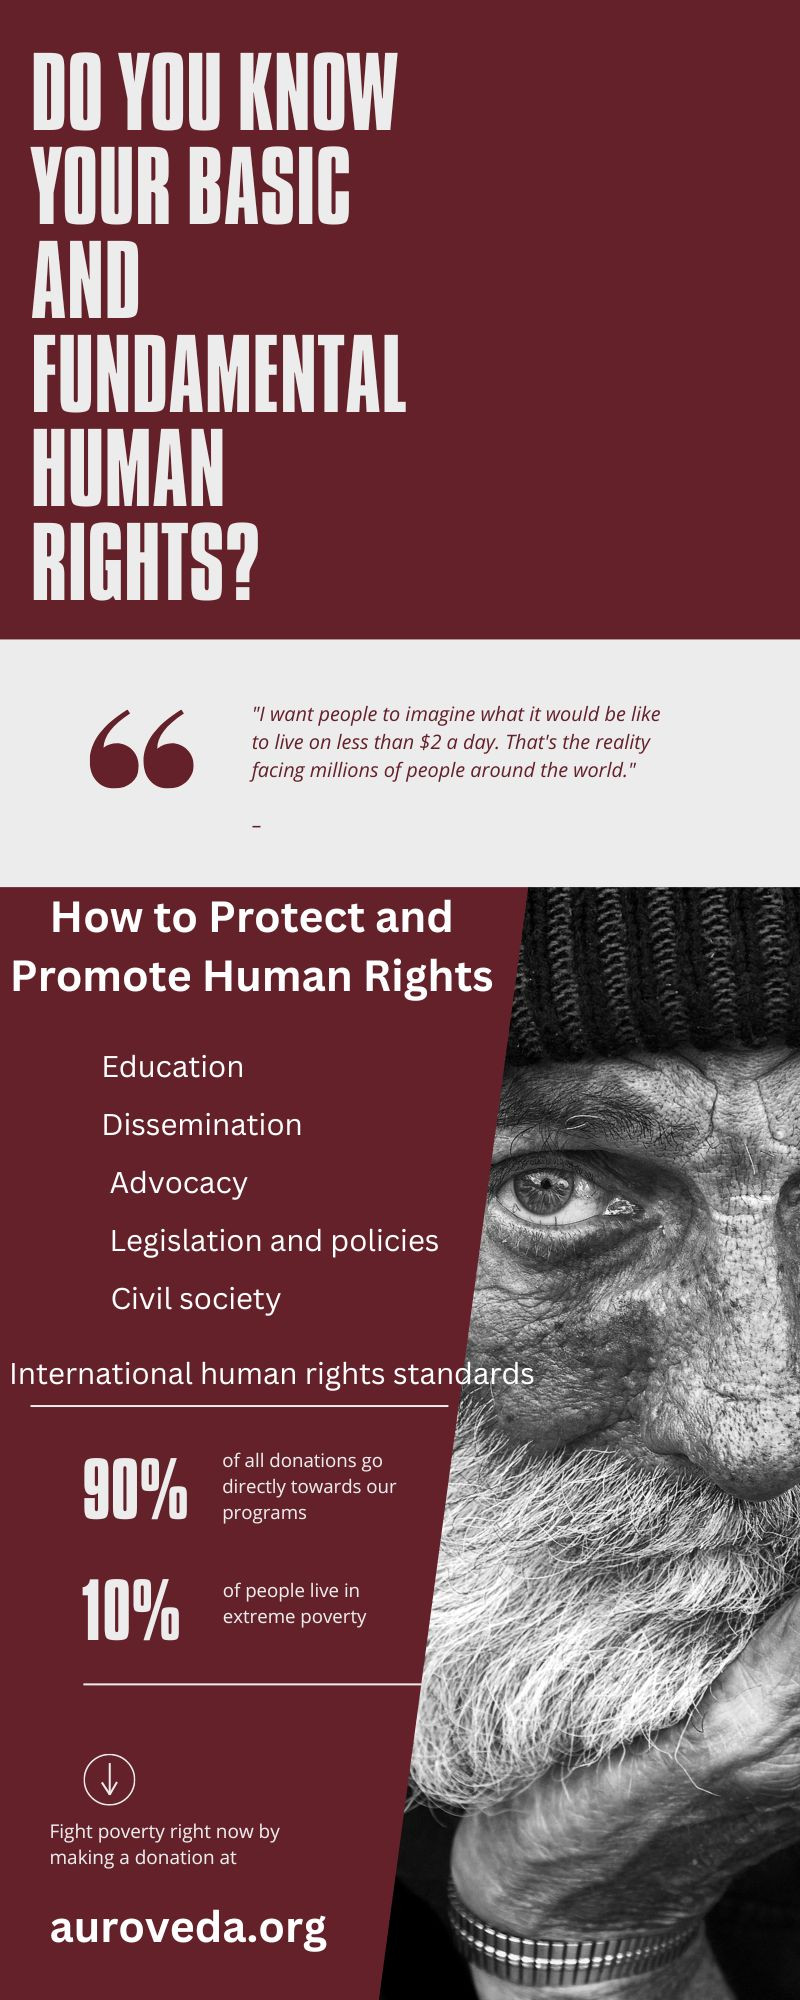 Do You Know Your Basic and Fundamental Human Rights - Gifyu